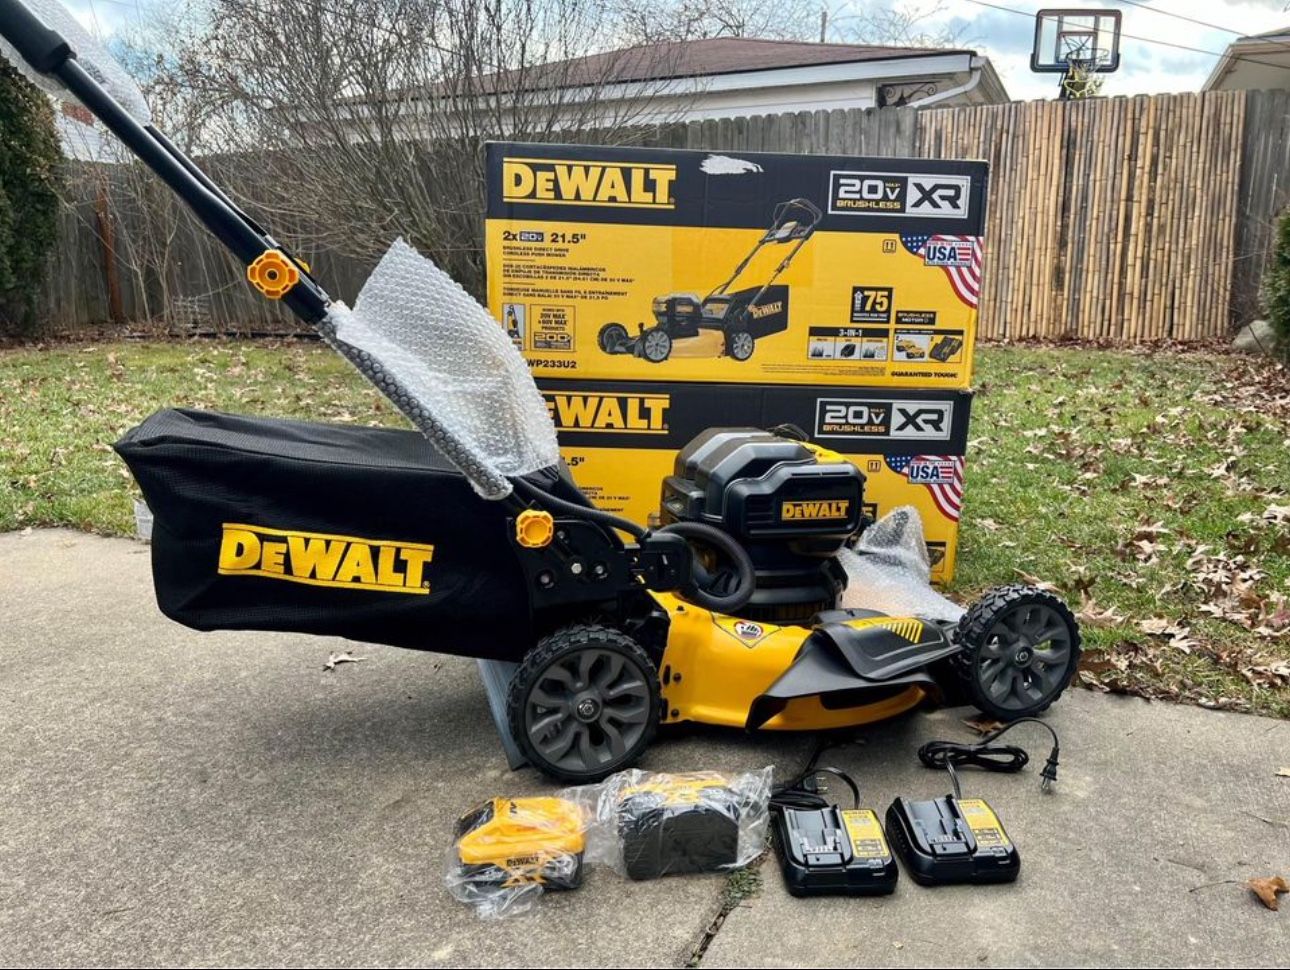 DEWALT 20V MAX Electric Push Lawn Mower + 2 Batteries & Charger - New In Box